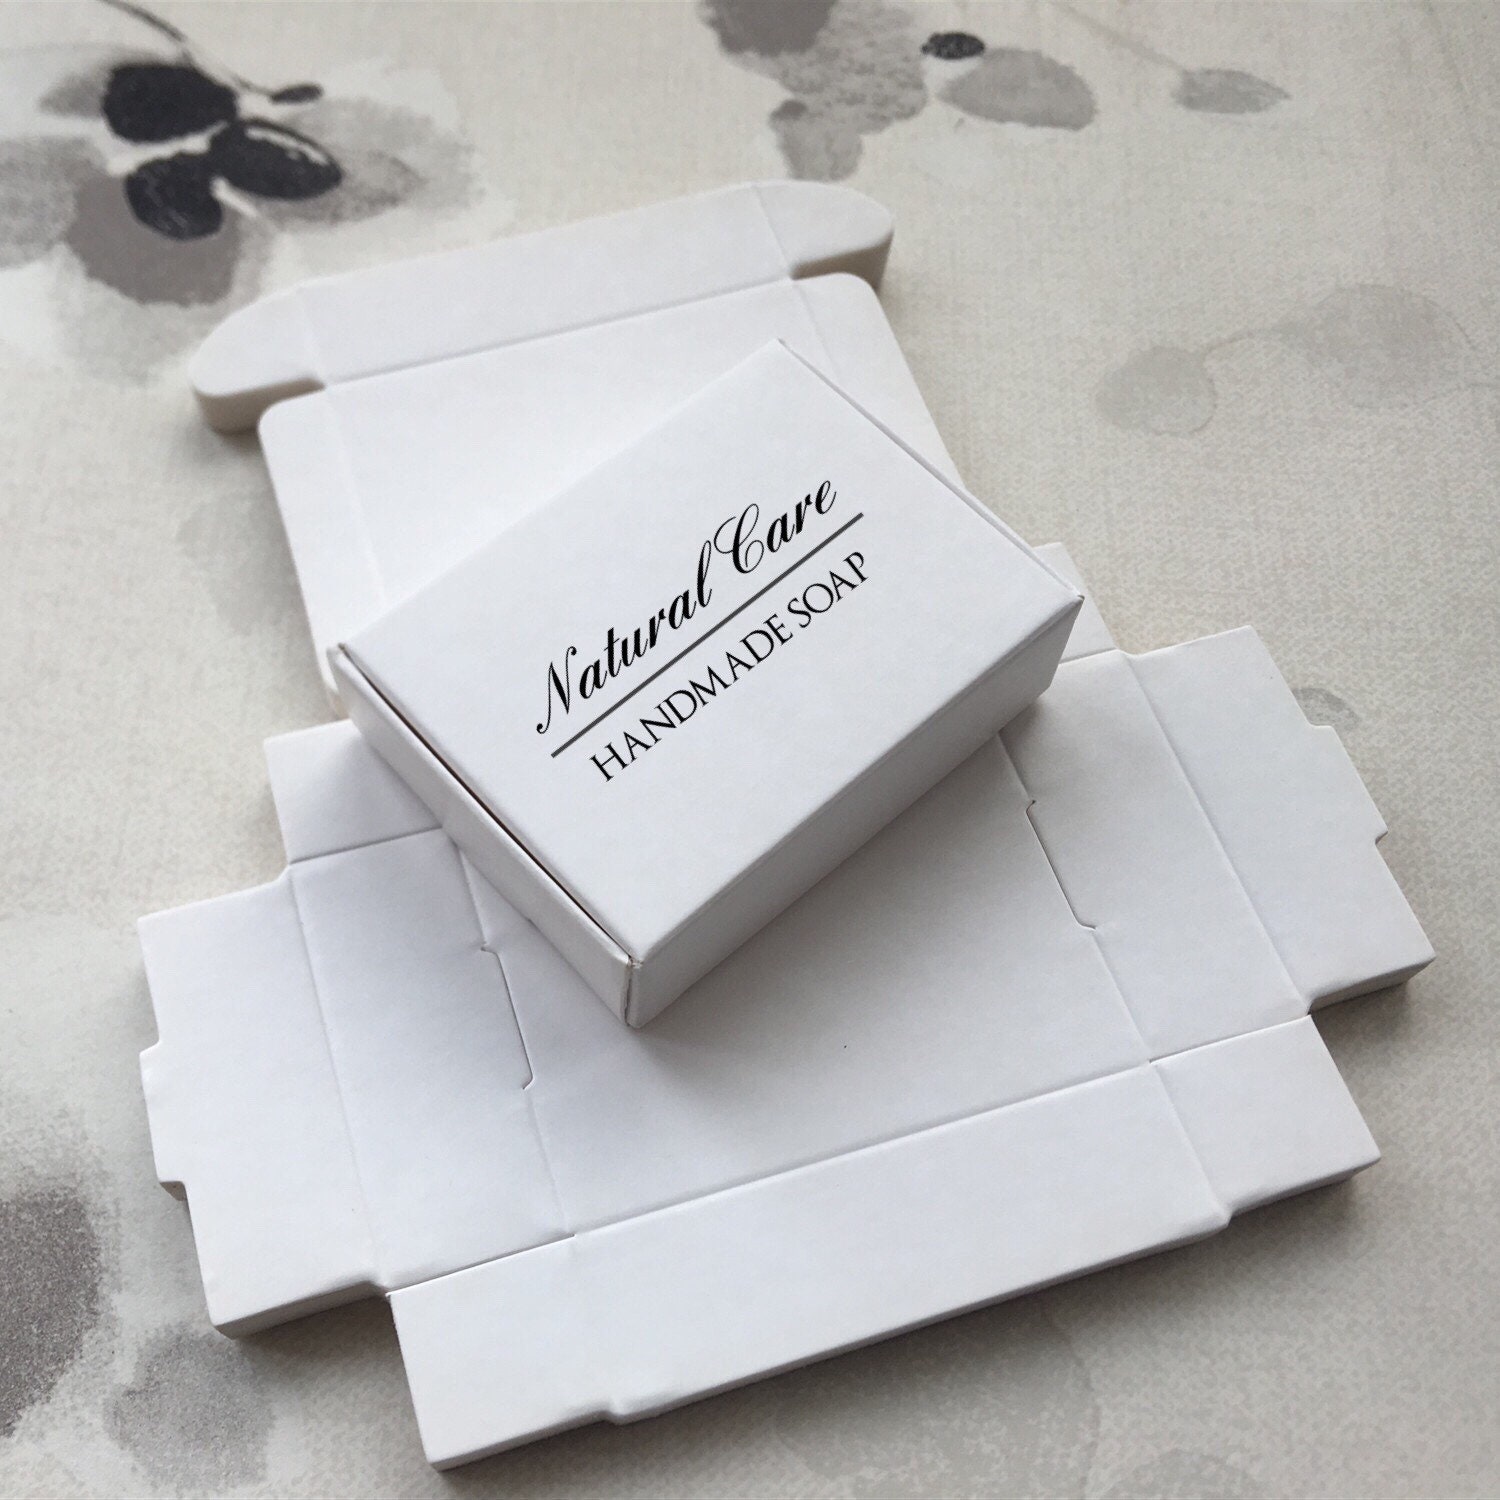 Custom Printed Boxes for Soap Packaging 